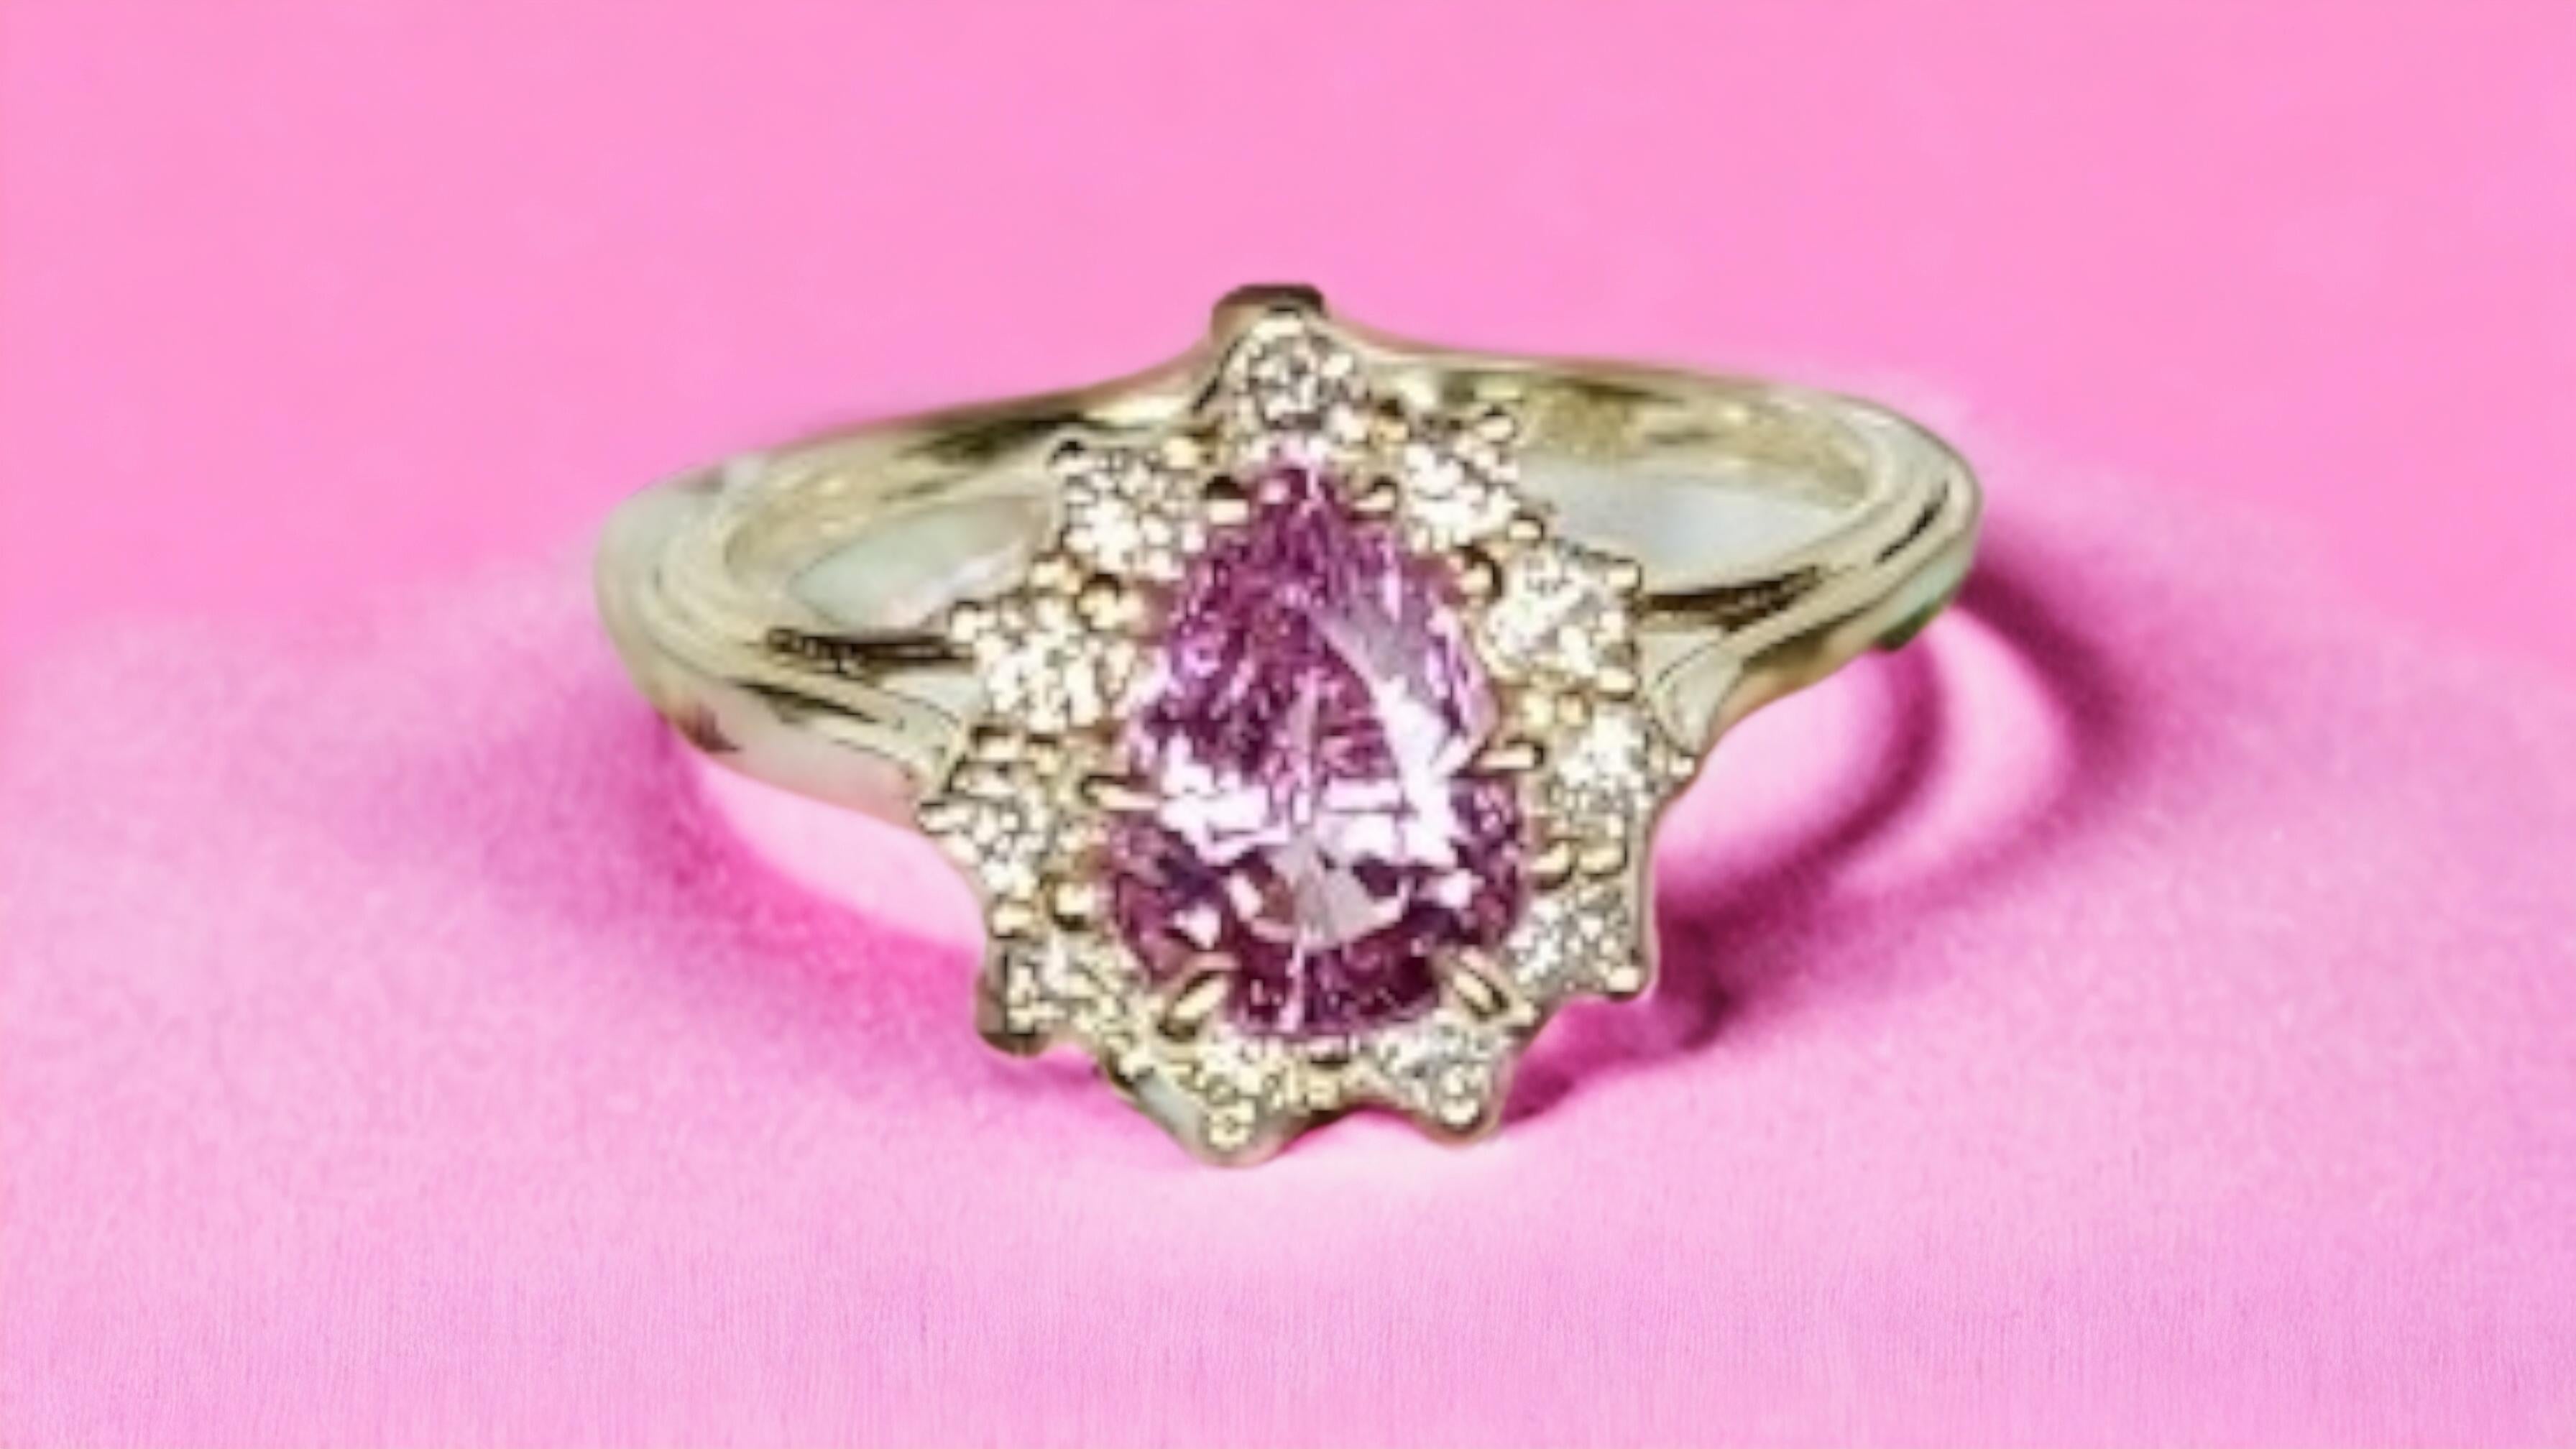 New Cert 1.37 ct Unheated Natural Pink Sapphire Diamond Ring in 14k Gold For Sale 3